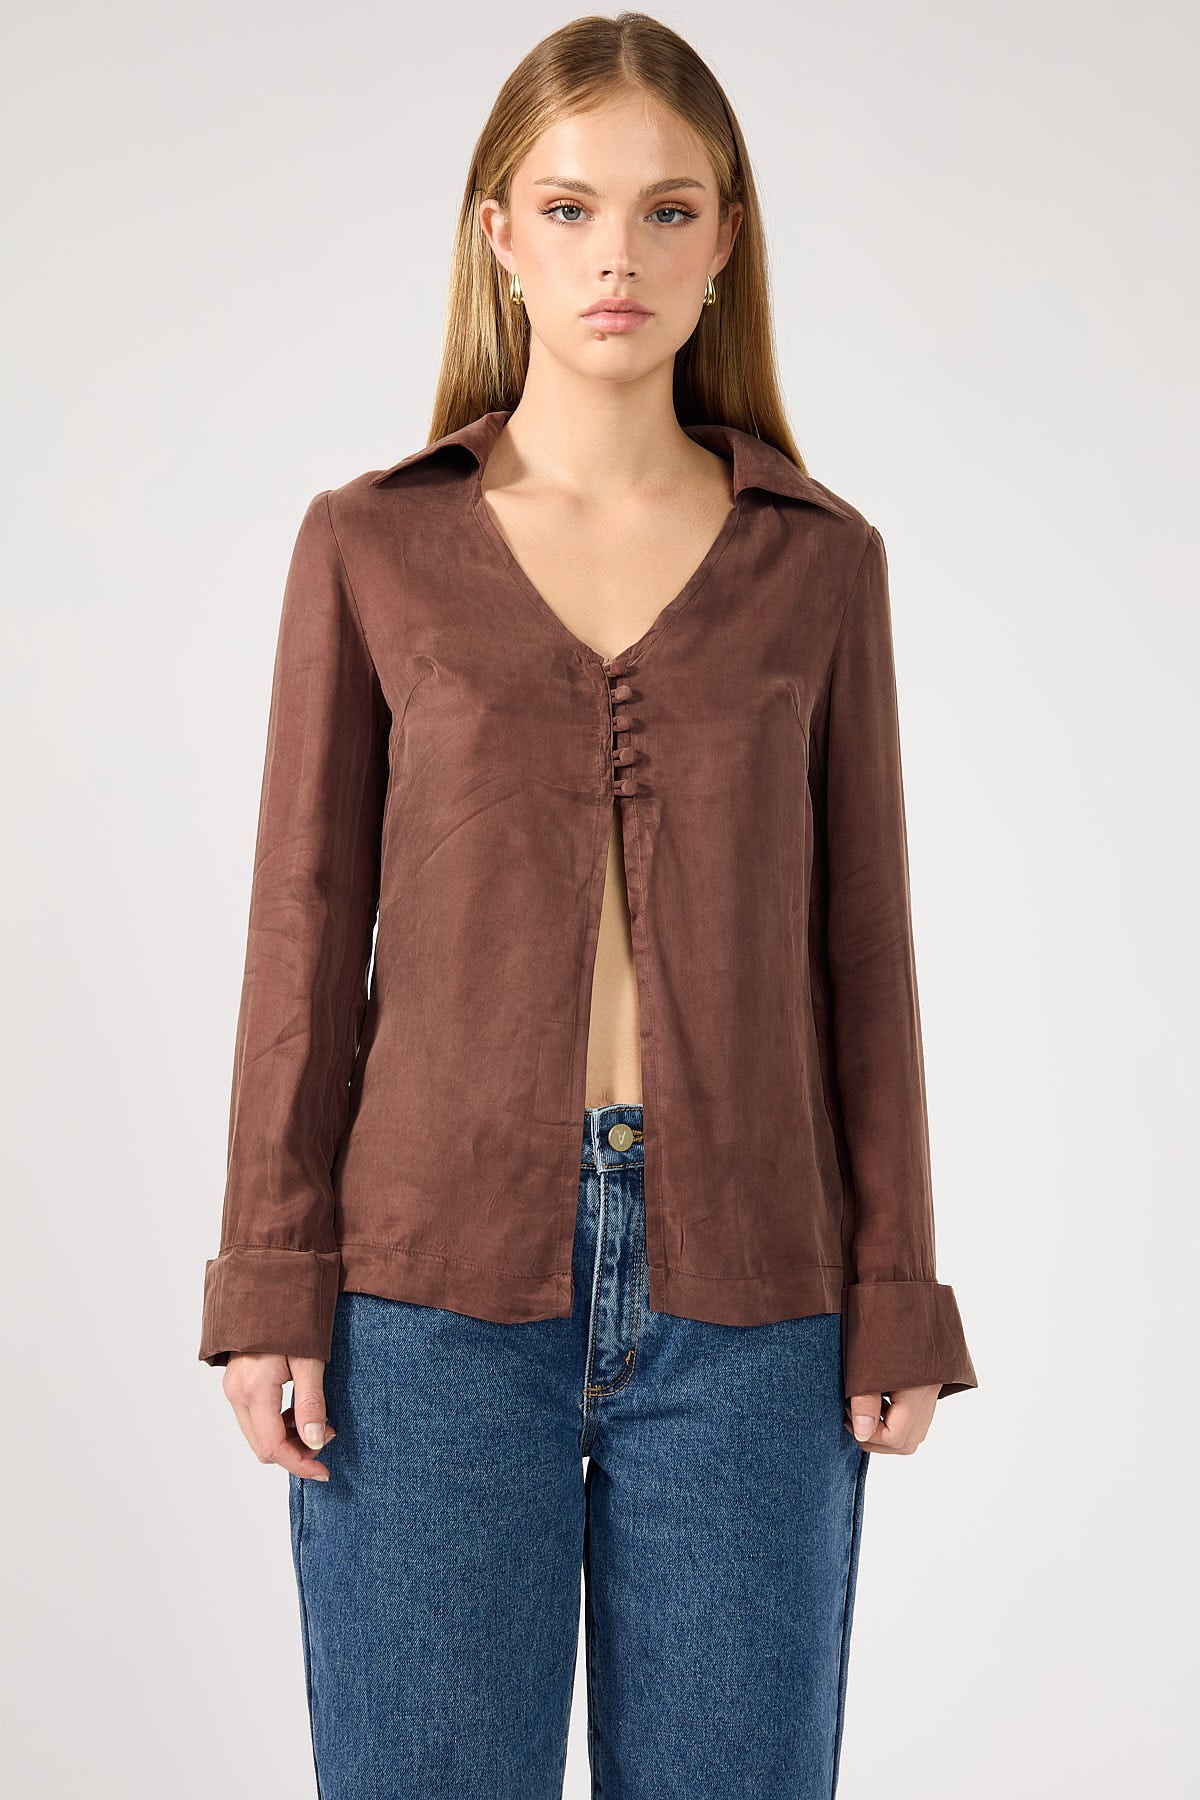 Perfect Stranger Prisca Open Front Button Up Cupro Shirt Brown